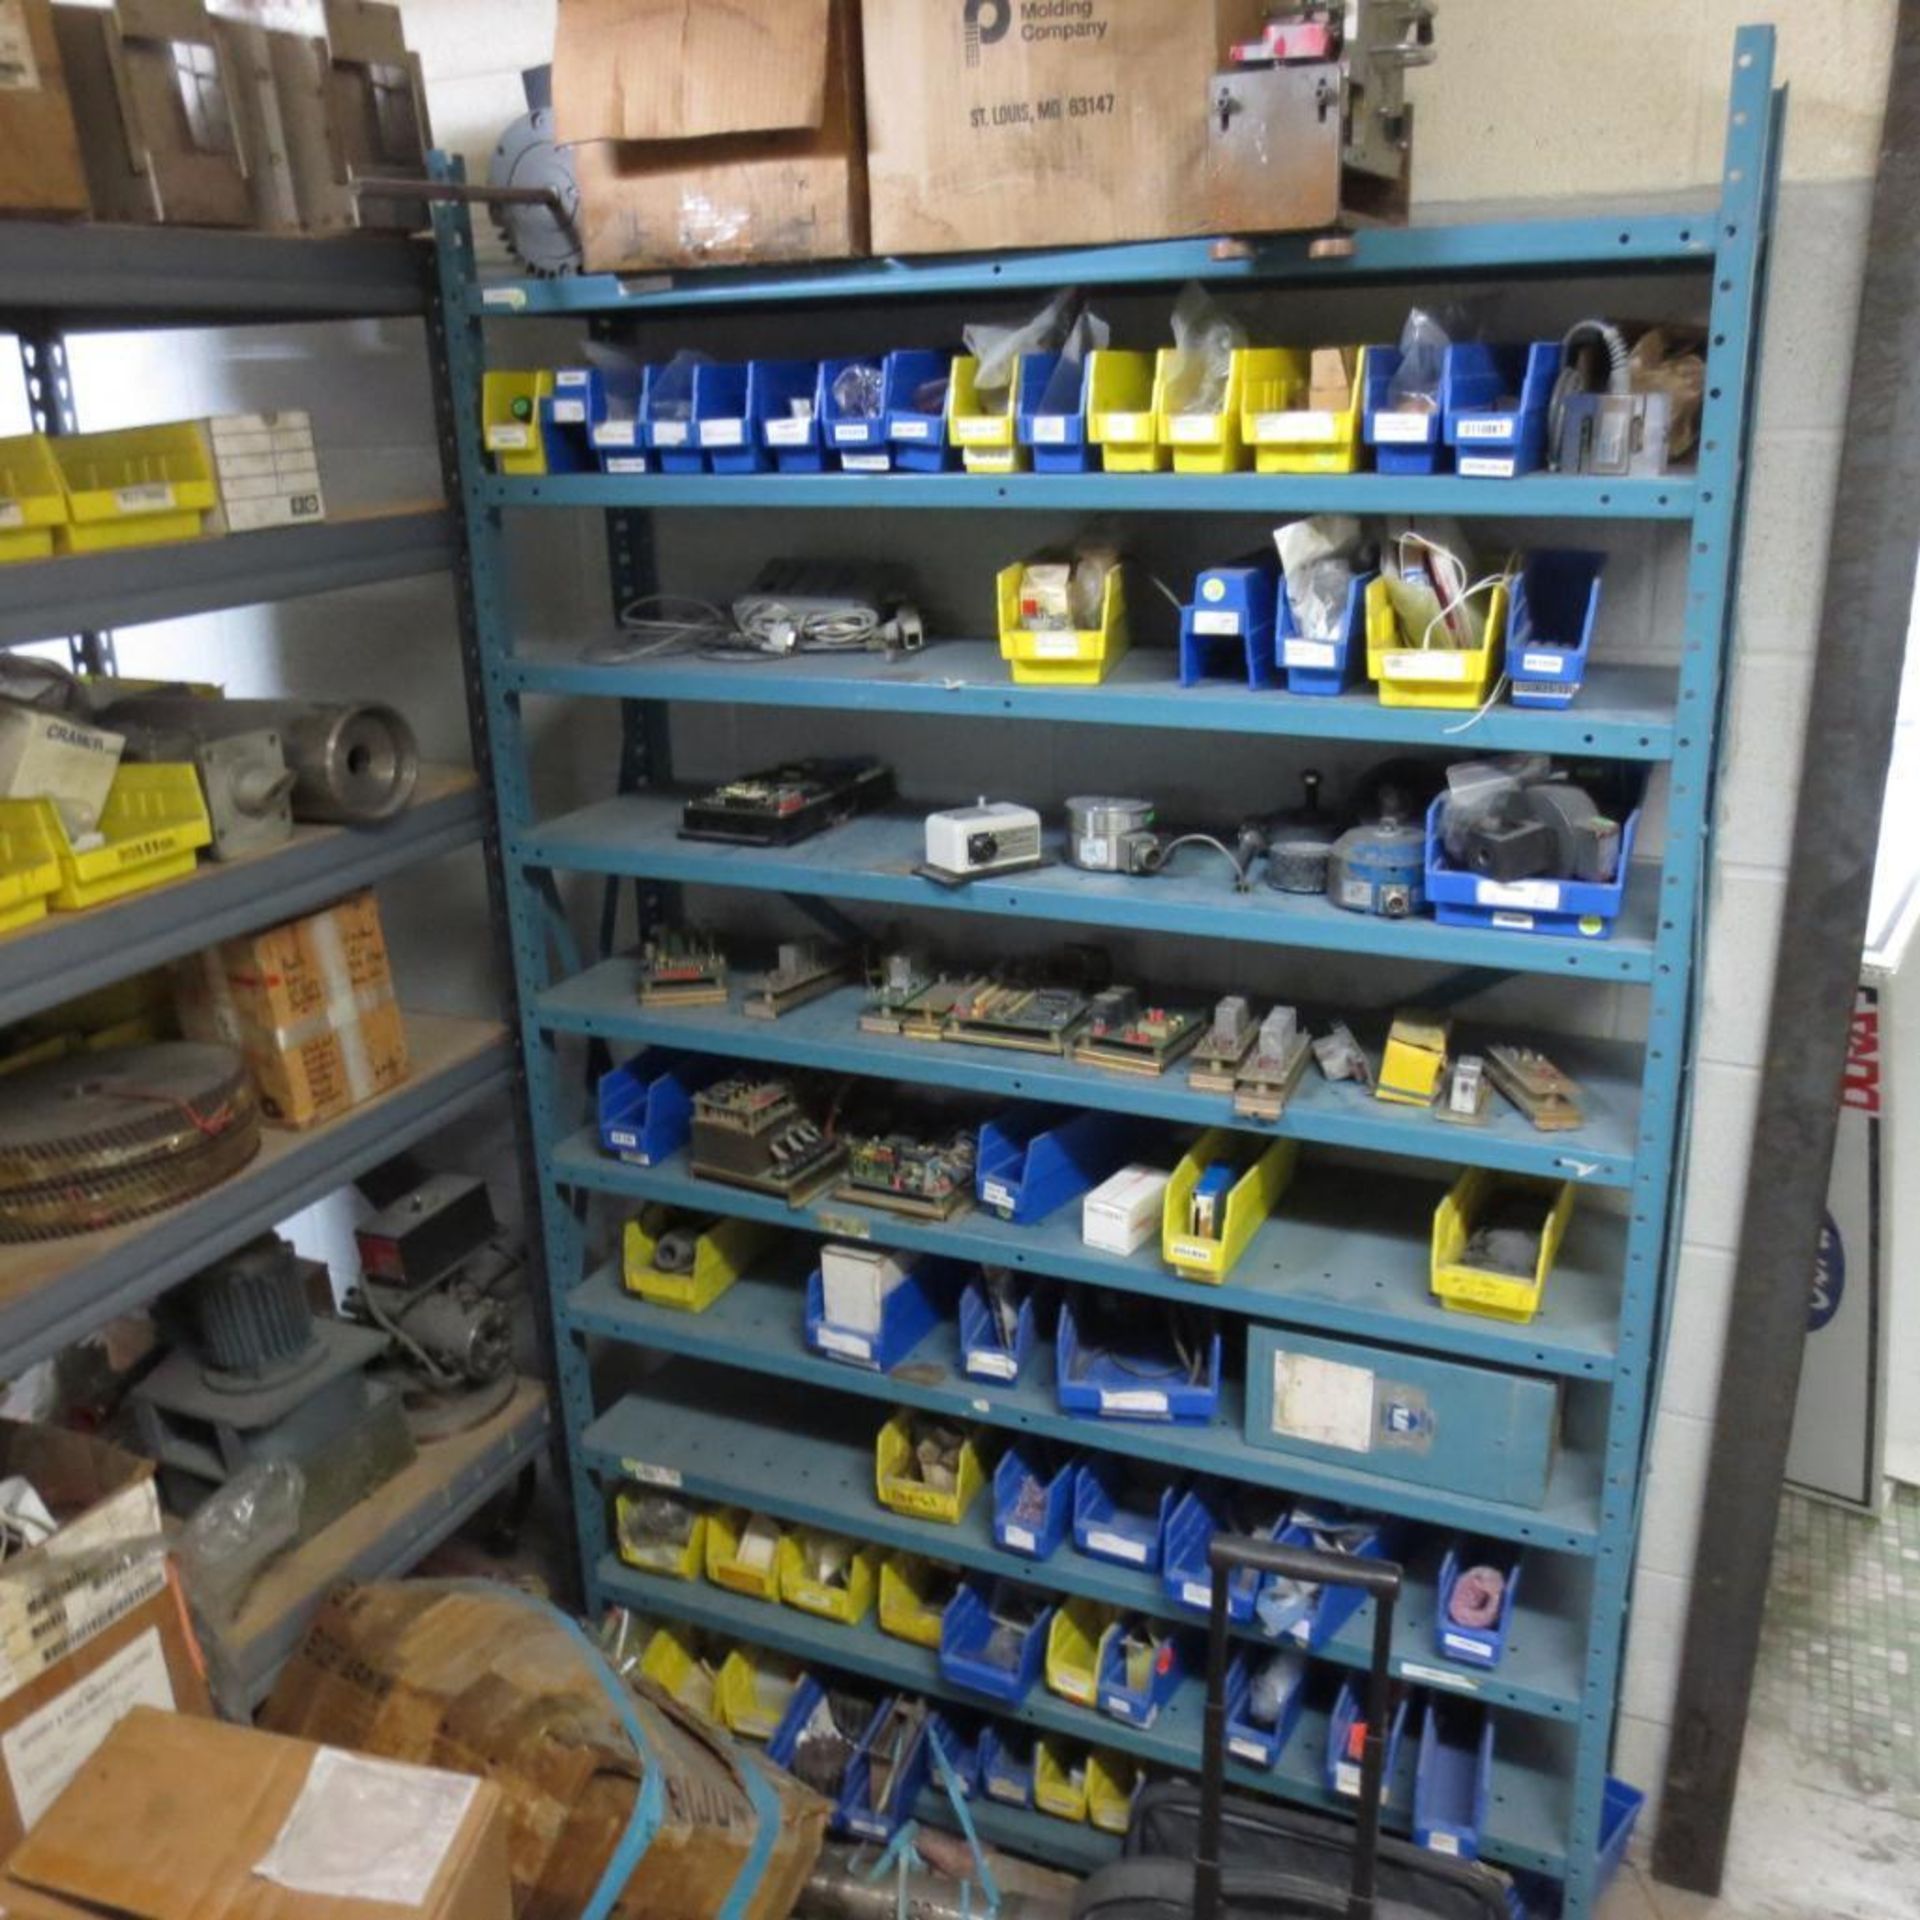 Parts Room Consisting of Gears, Electric Boards, Motors, AB Item, Filters, Motor Starters and Parts